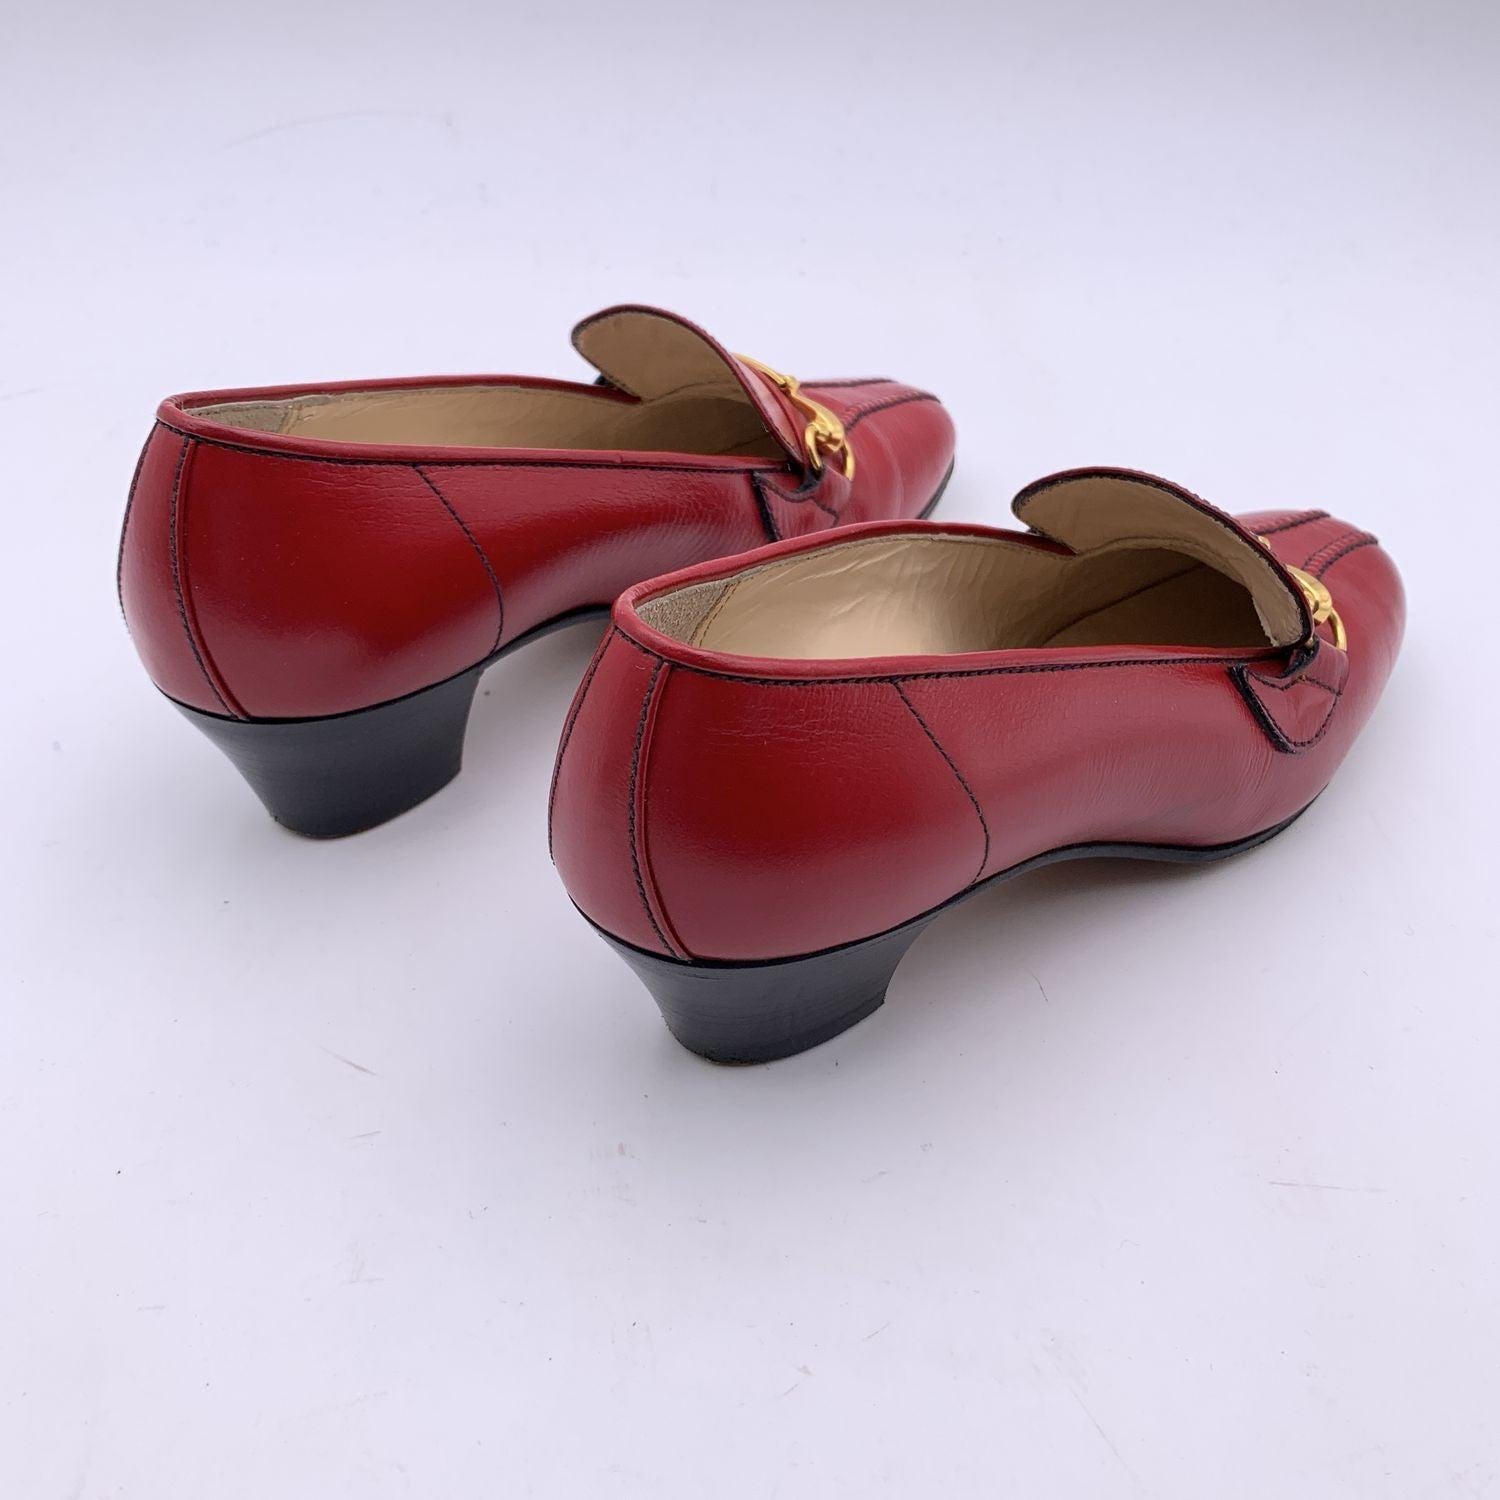 Gucci Vintage Red Leather Horsebit Shoes Loafers Size 35.5 1